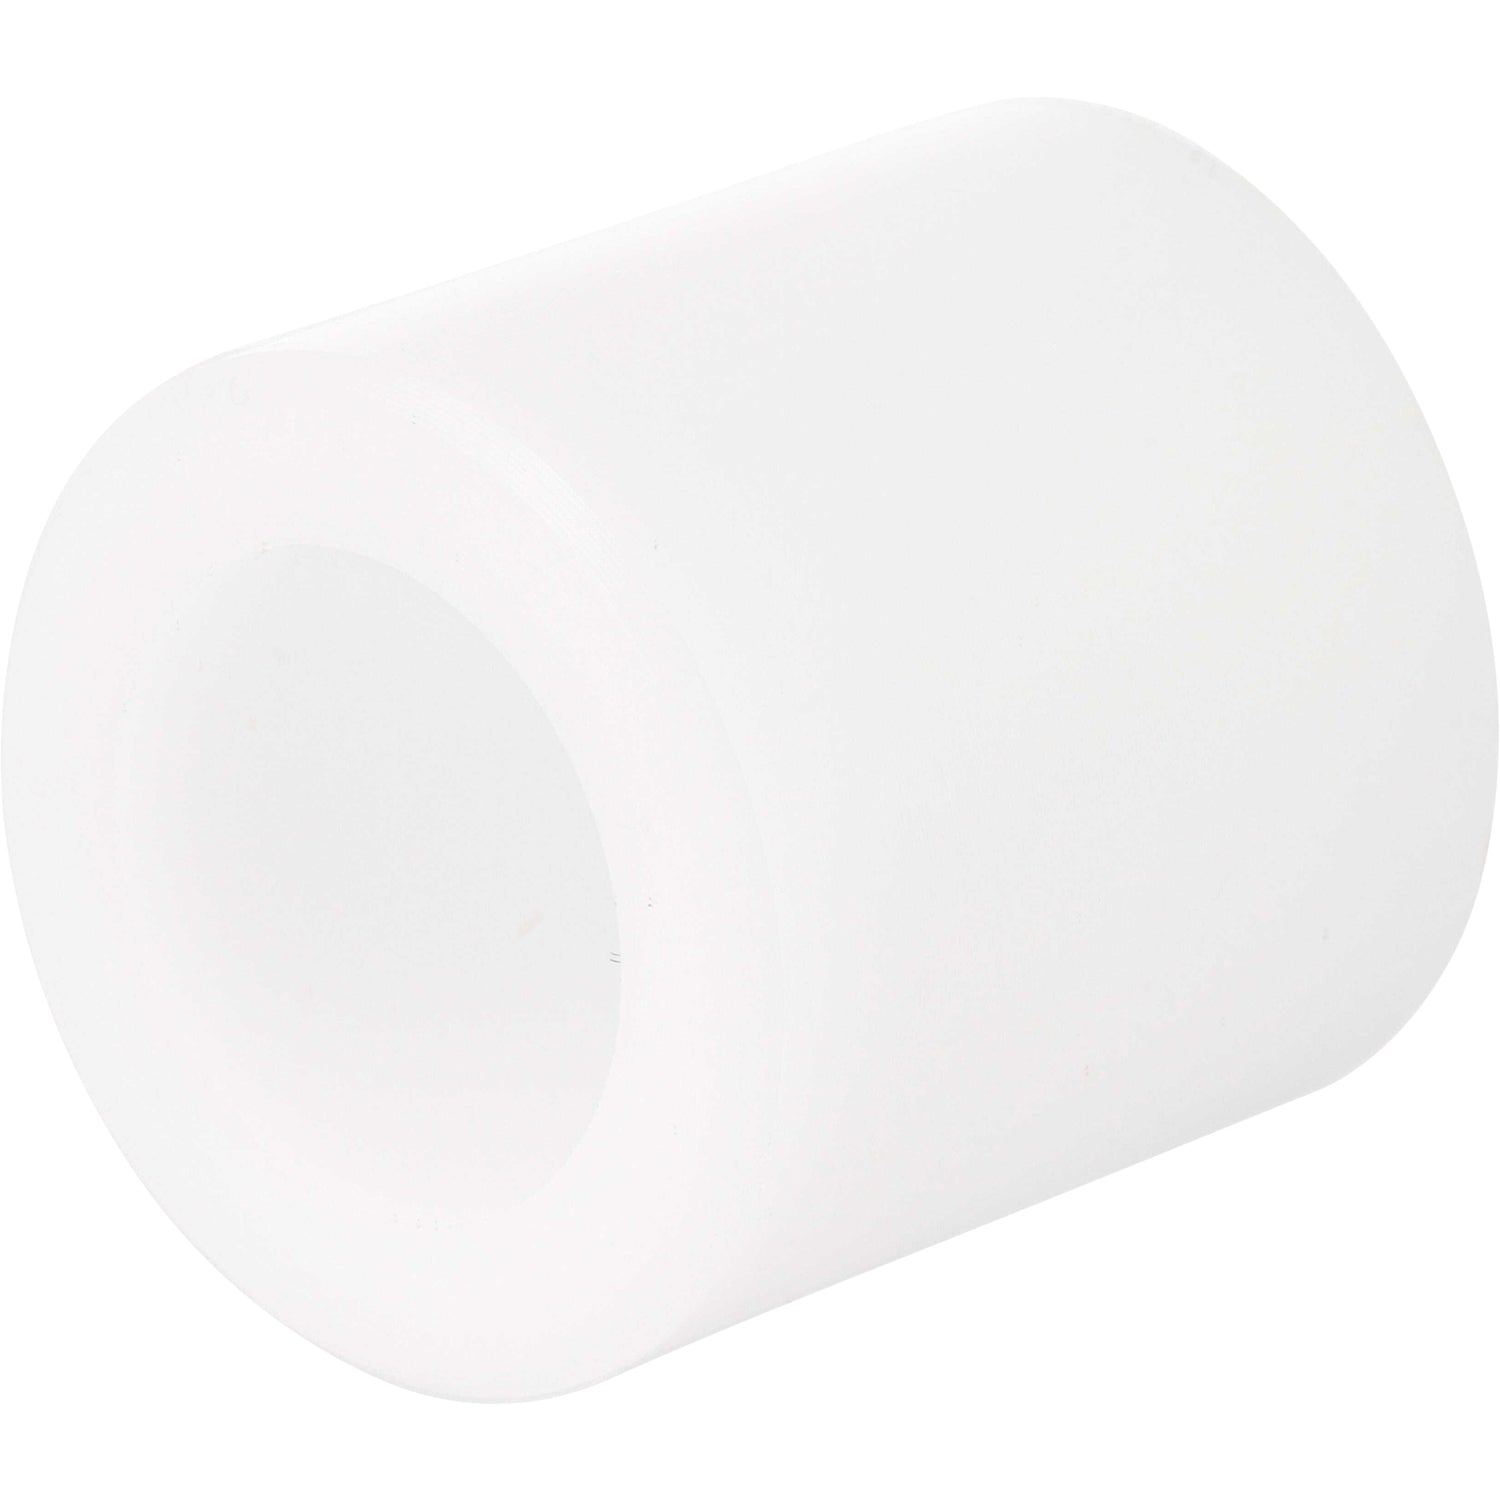 Cylindrical white plastic part with through hole on white background. 